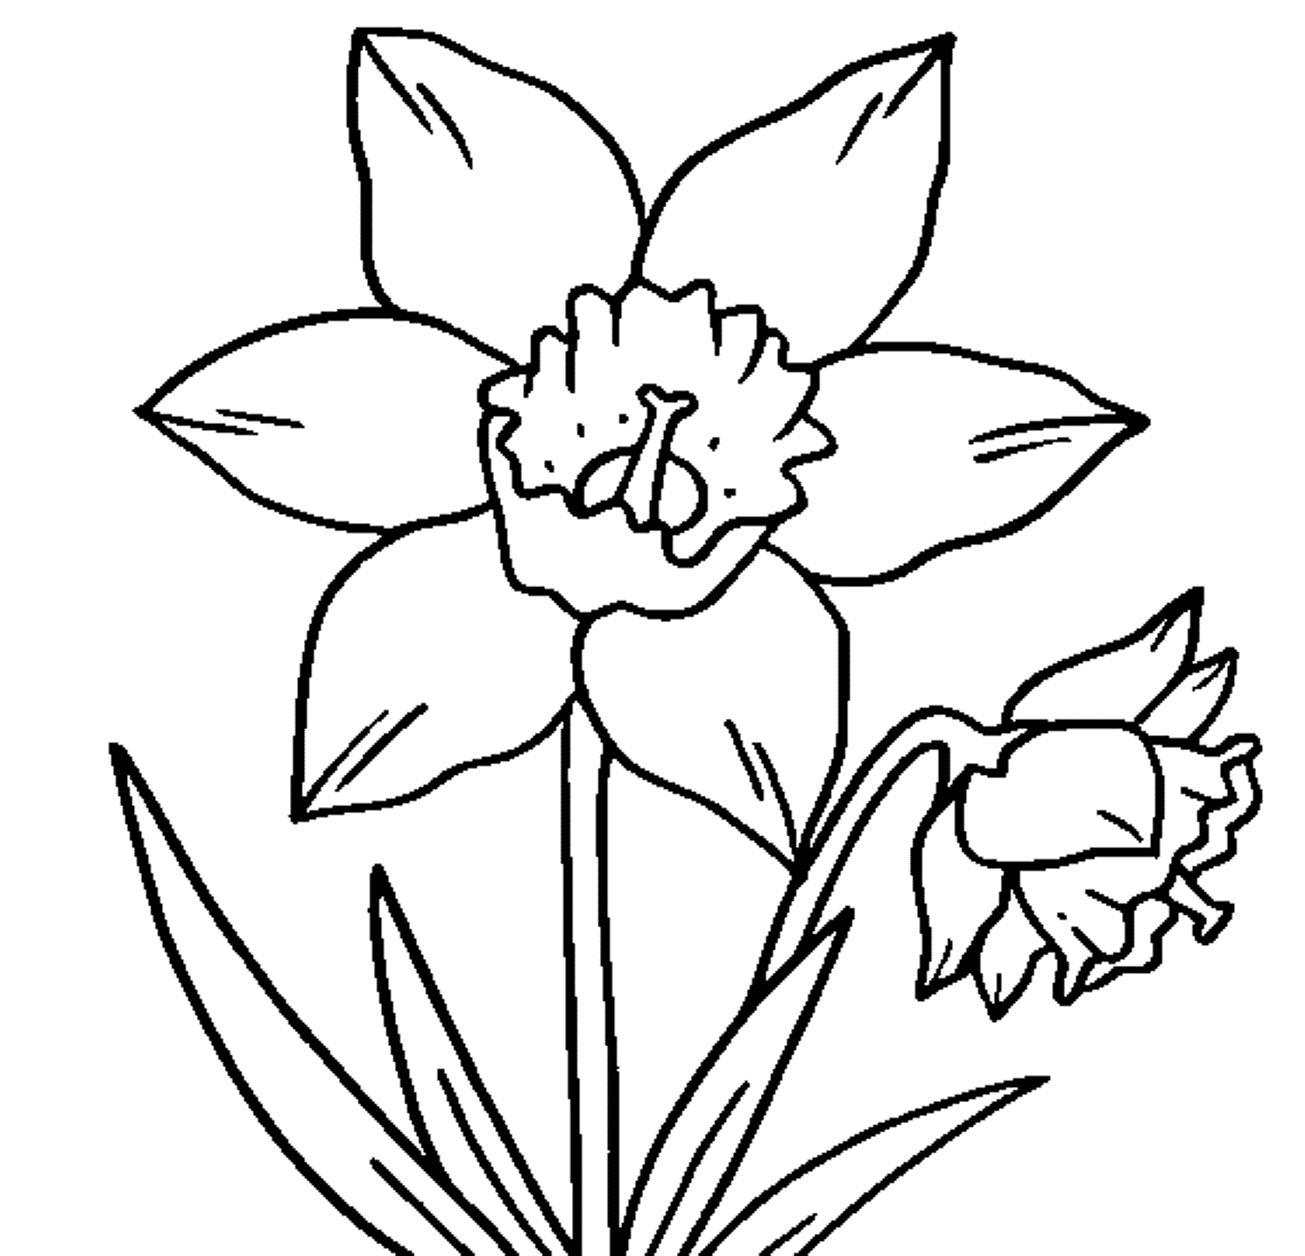 Coloring Pictures Of Daffodils - ClipArt Best